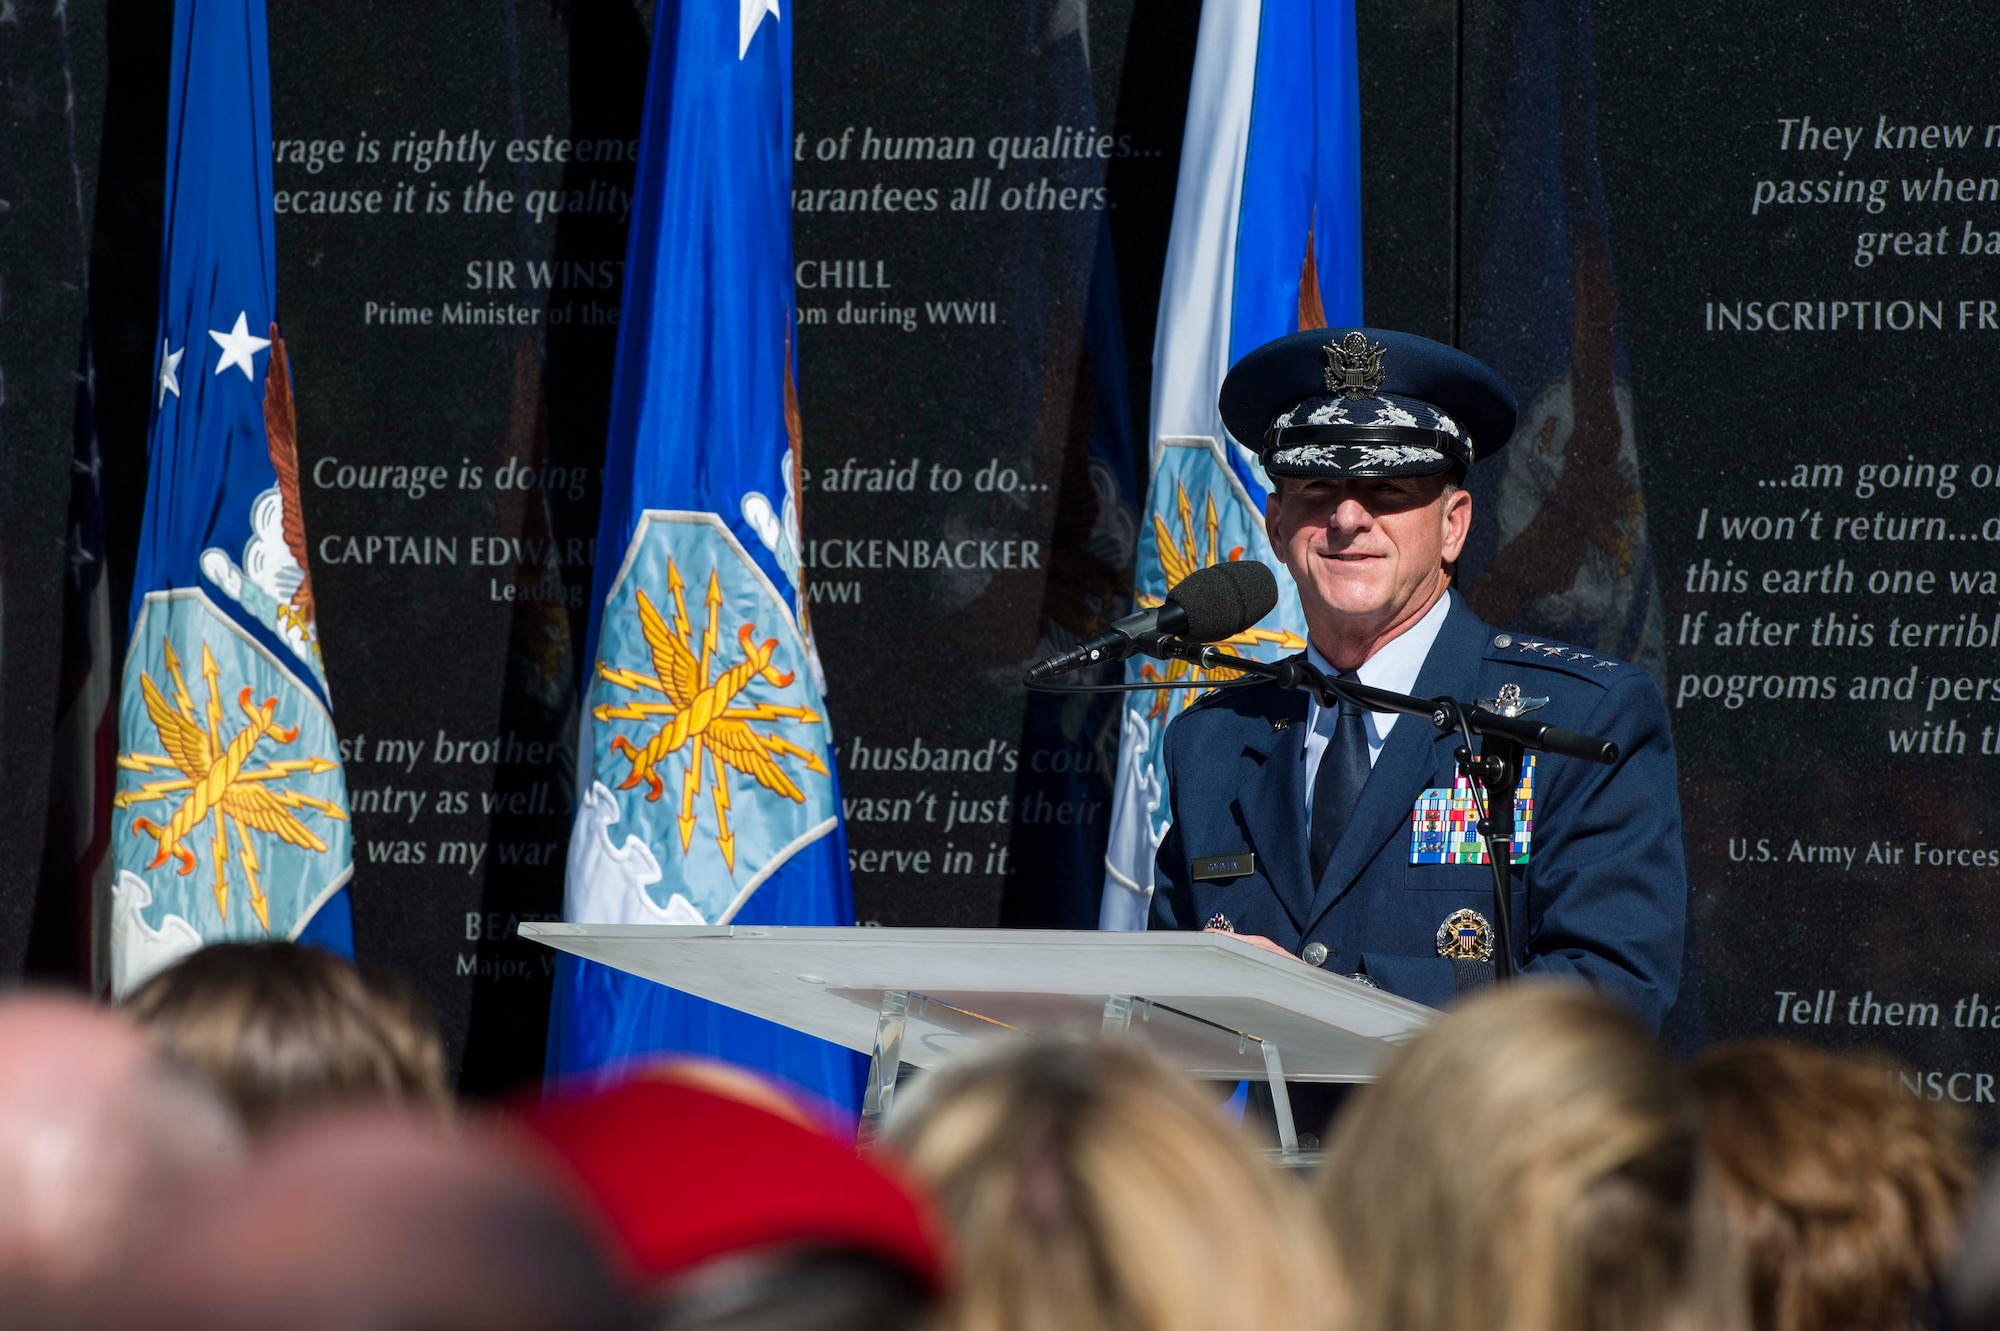 Air Force Chief of Staff Gen. David L. Goldfein speaks during Master Sgt. John Chapman’s name unveiling ceremony at the Air Force Memorial in Arlington, Va., Aug. 24, 2018. Chapman was posthumously awarded the Medal of Honor for actions on Takur Ghar Mountain in Afghanistan March 4, 2002. An elite special operations team was ambushed by the enemy and came under heavy fire from multiple directions. Chapman immediately charged an enemy bunker through thigh-deep snow and killed all enemy occupants. Courageously moving from cover to assault a second machine gun bunker, he was injured by enemy fire. Despite severe wounds, he fought relentlessly, sustaining a violent engagement with multiple enemy personnel before making the ultimate sacrifice. With his last actions he saved the lives of his teammates. (U.S. Air Force photo by Tech. Sgt. DeAndre Curtiss)